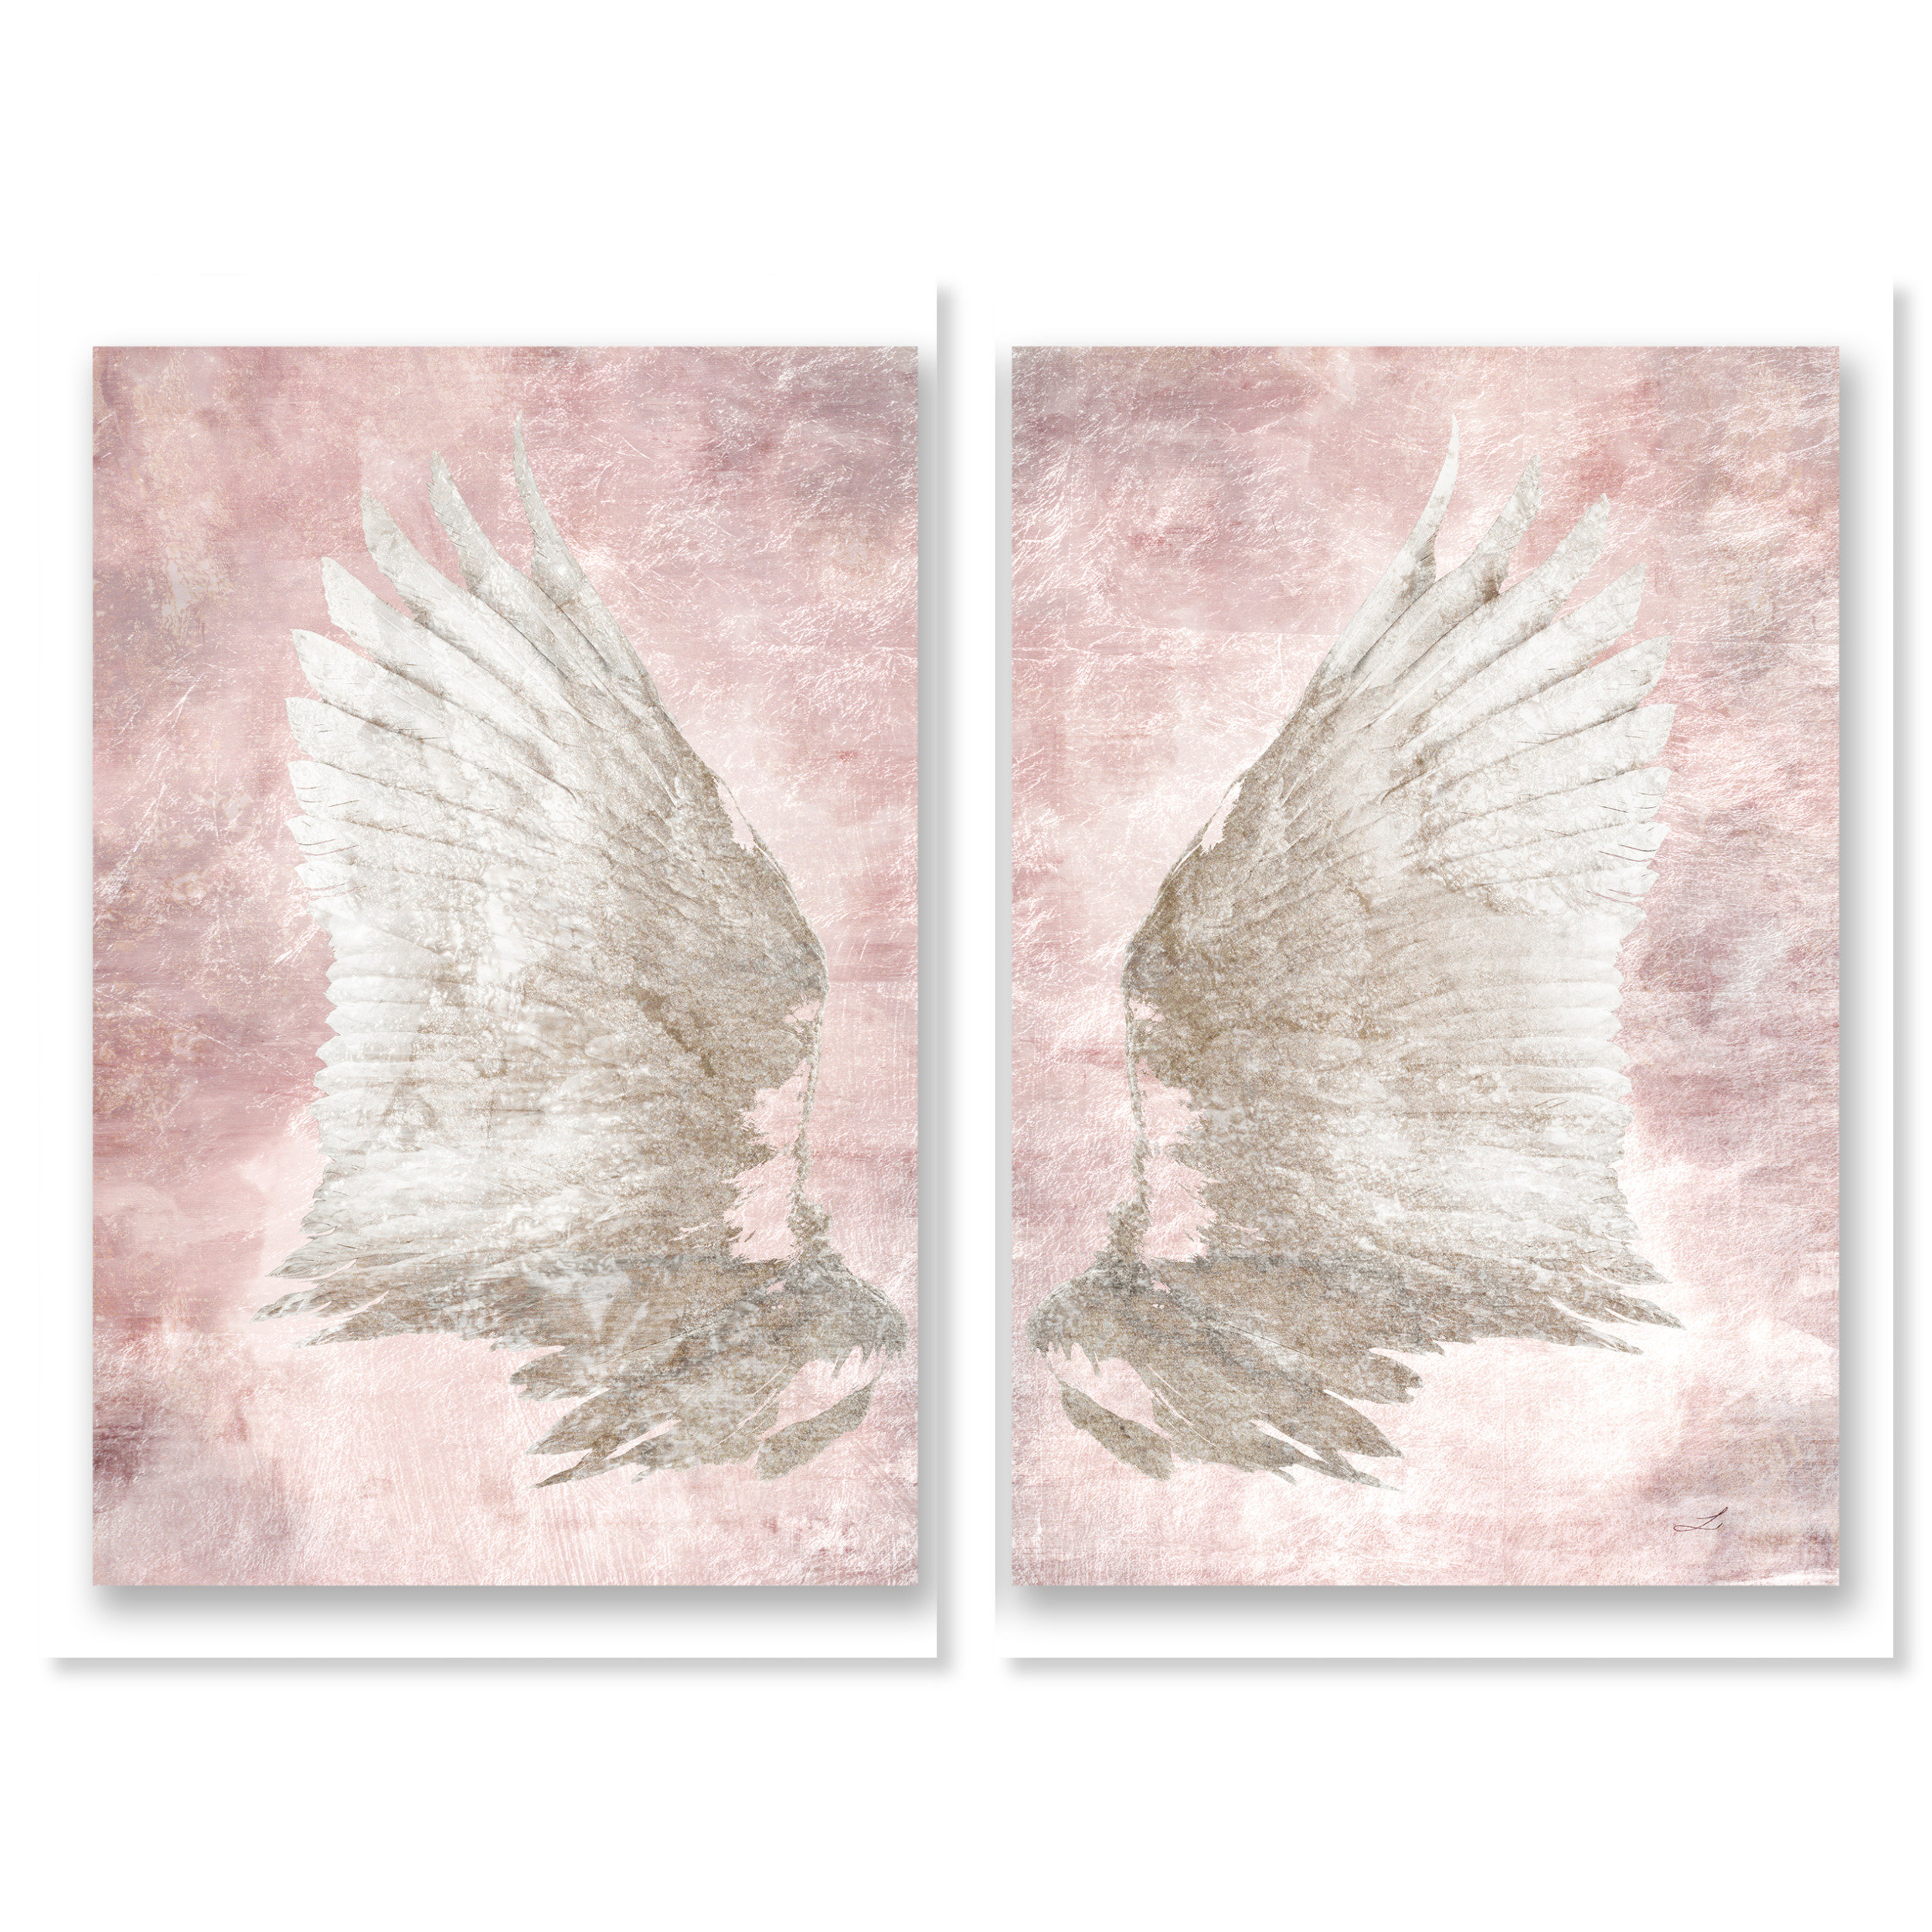 Fashion Chie's Freedom Wings On Canvas 2 Pieces Print